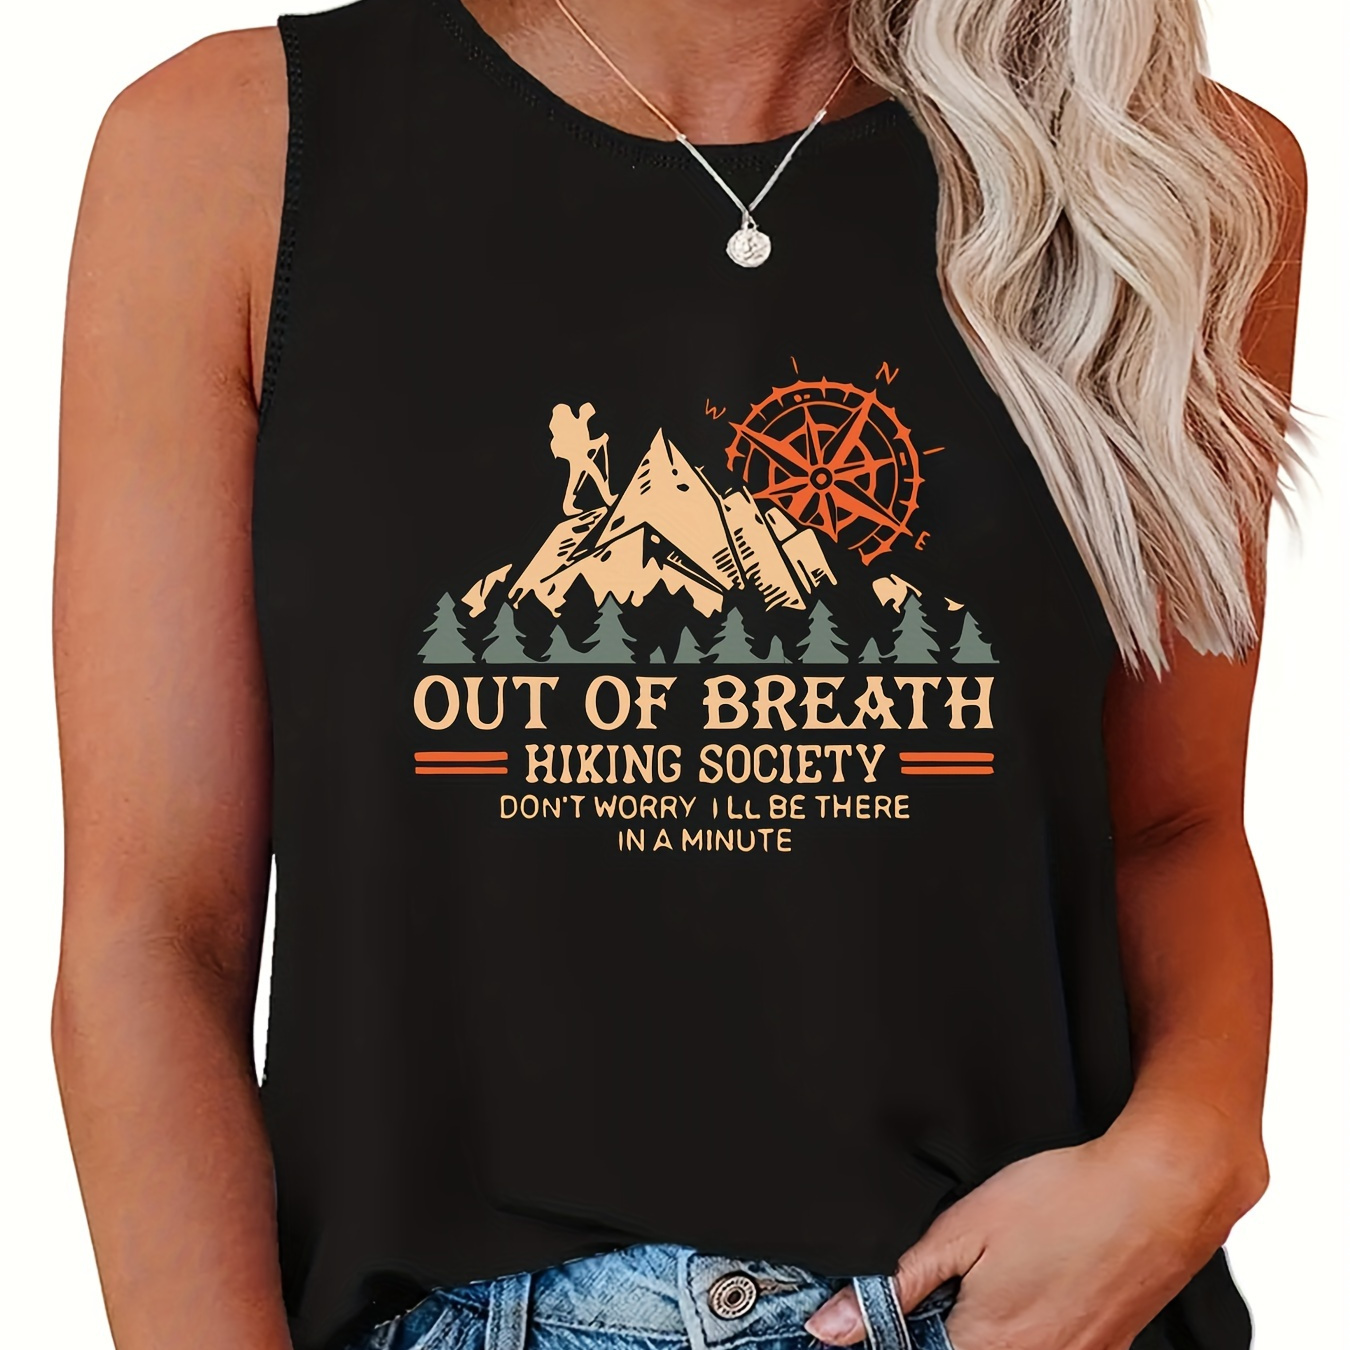 

Women's Fashion Sleeveless Tank Top, Casual Round Neck T-shirt, Graphic "out Of Breath Hiking Society" Design With Mountain And Compass, Contrast Lettering